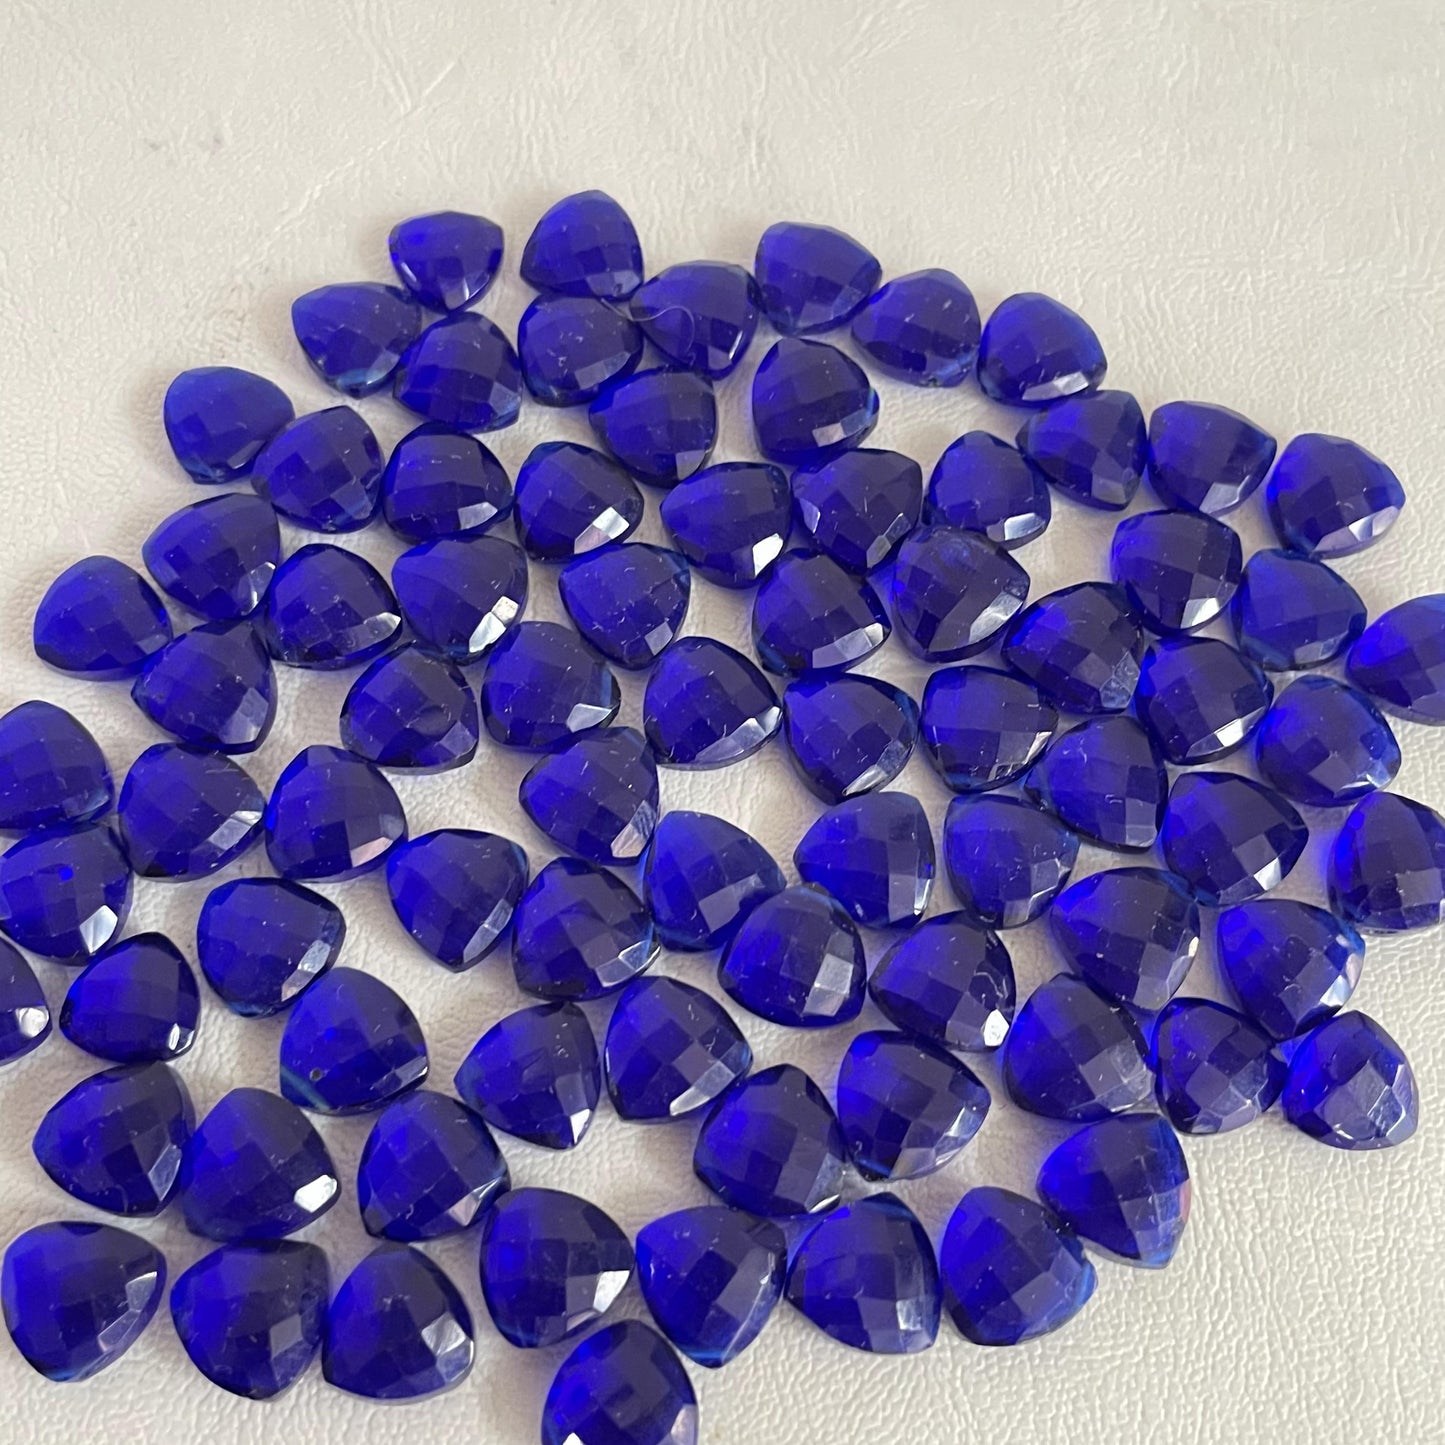 Tanzanite Faceted Nice Quality (11 mm) Briolette